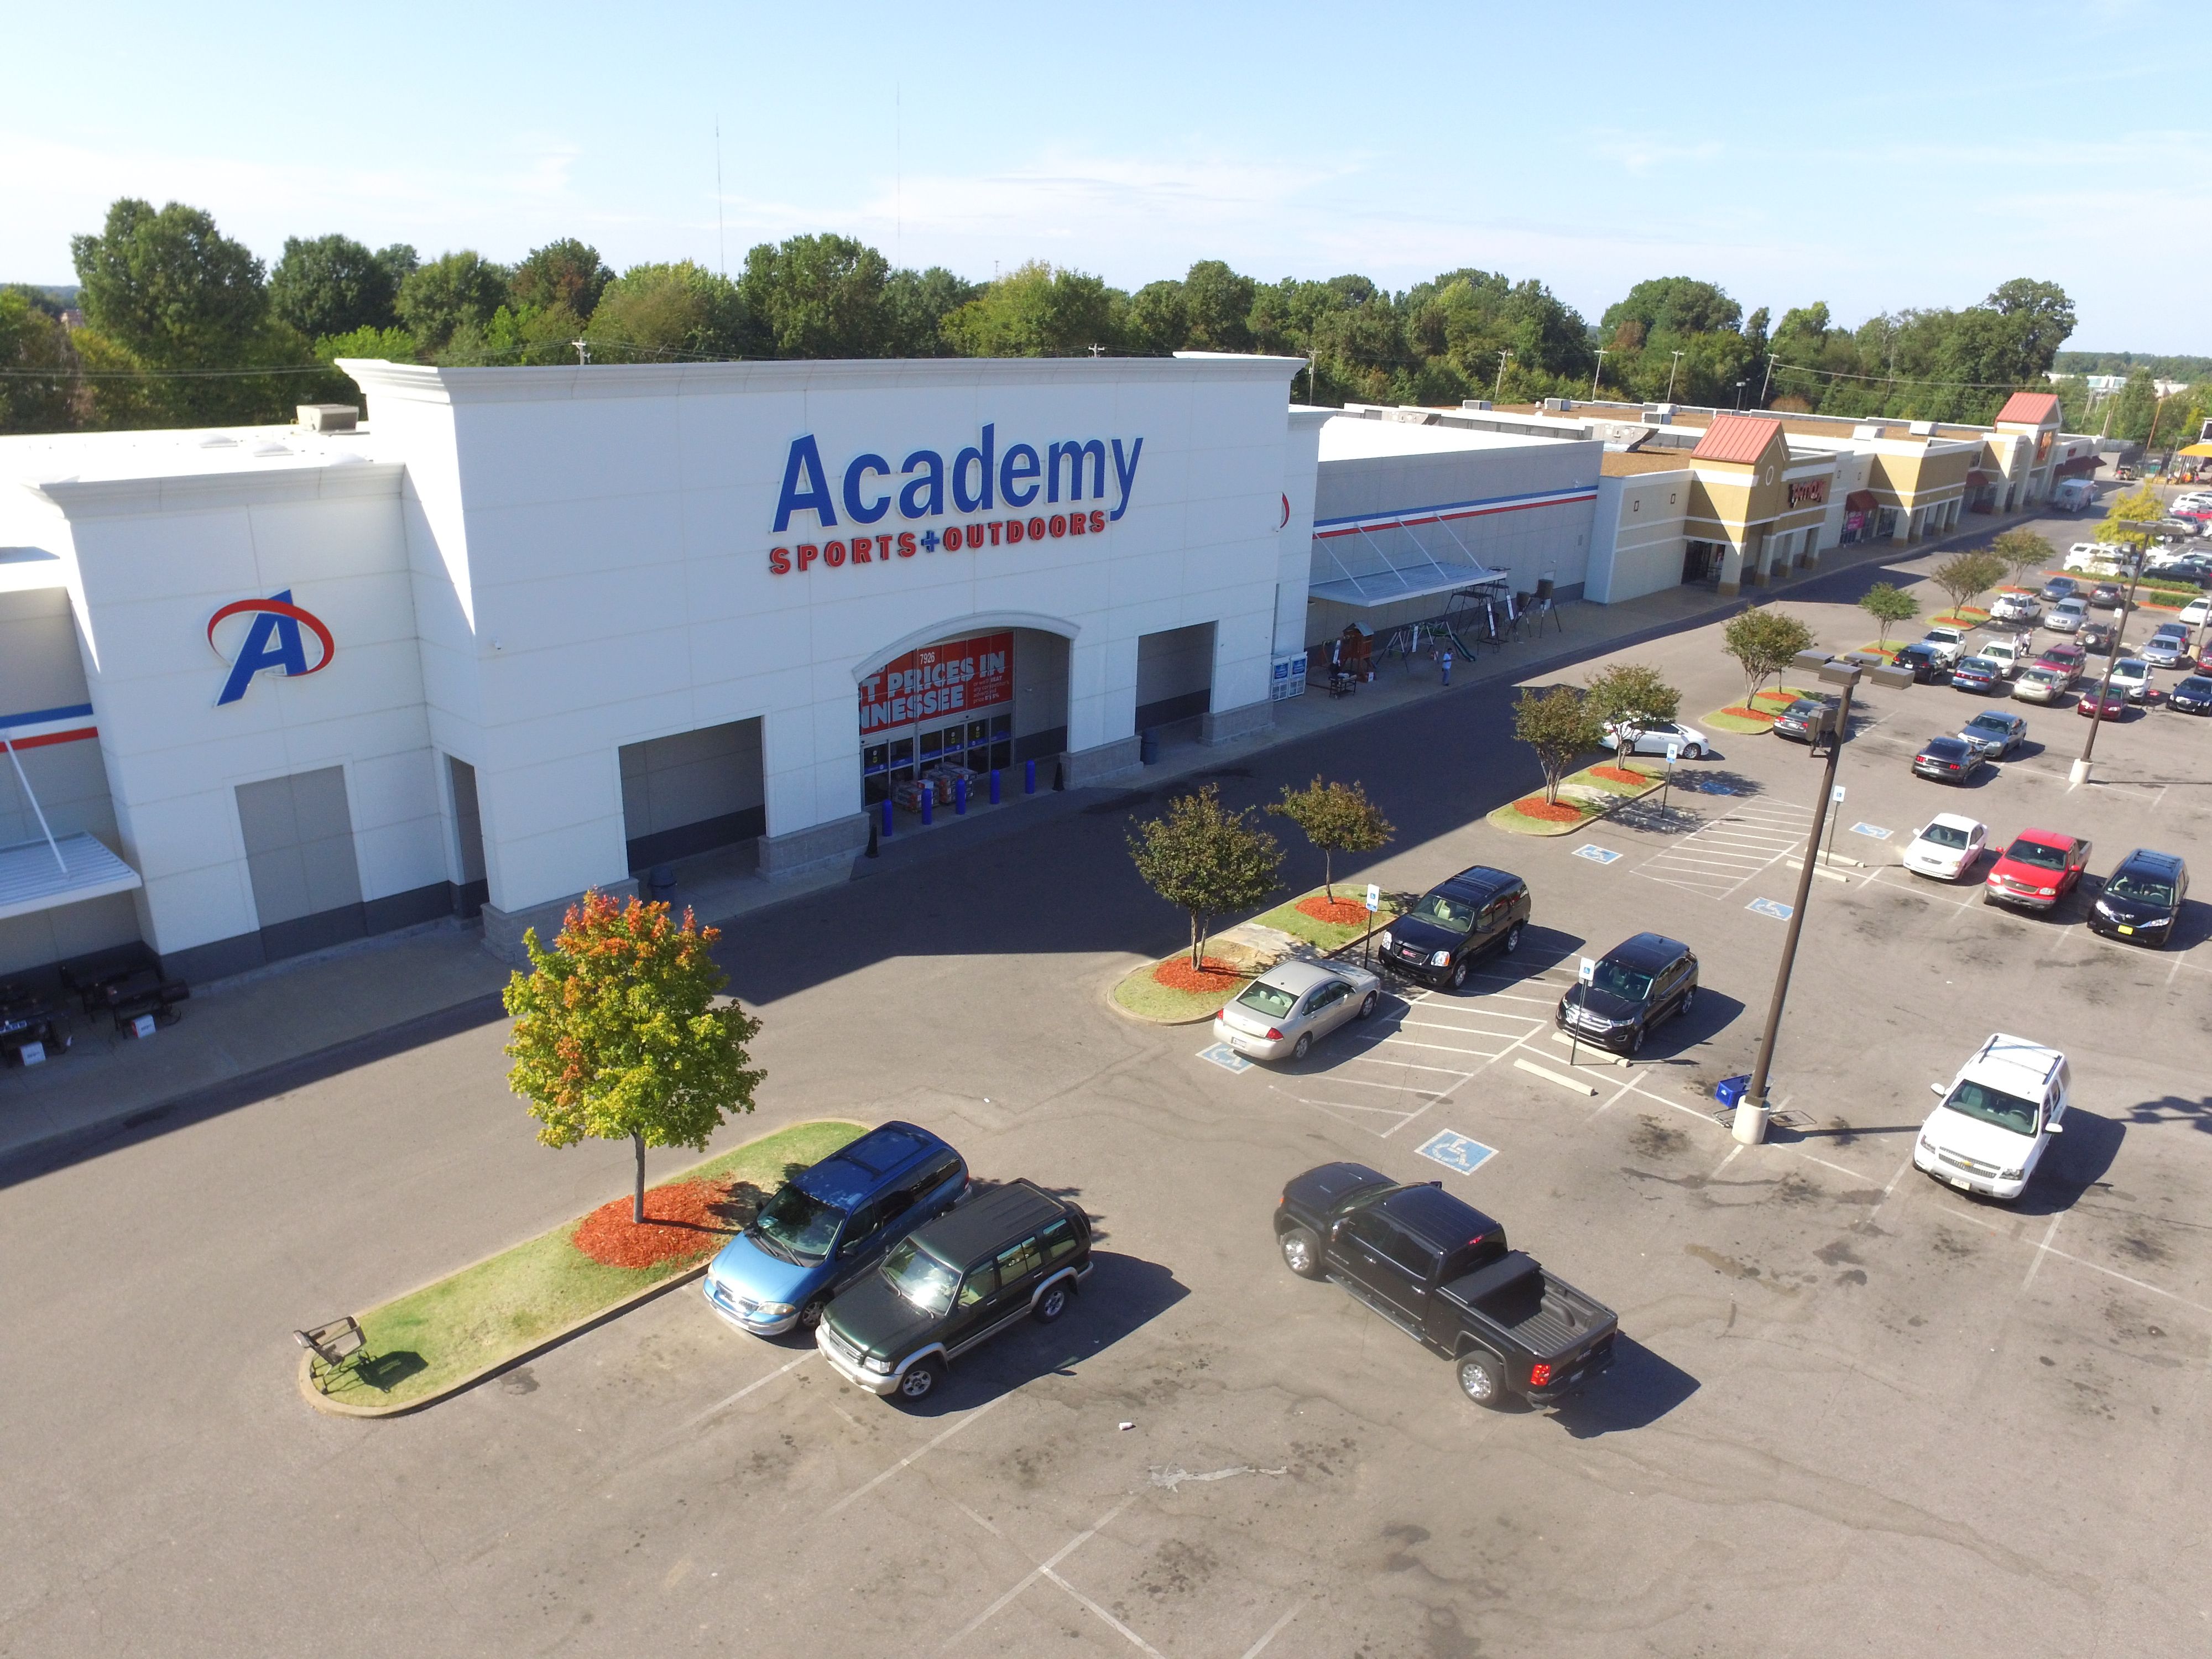 exterior view of academy, sports and outdoors store with parking lot